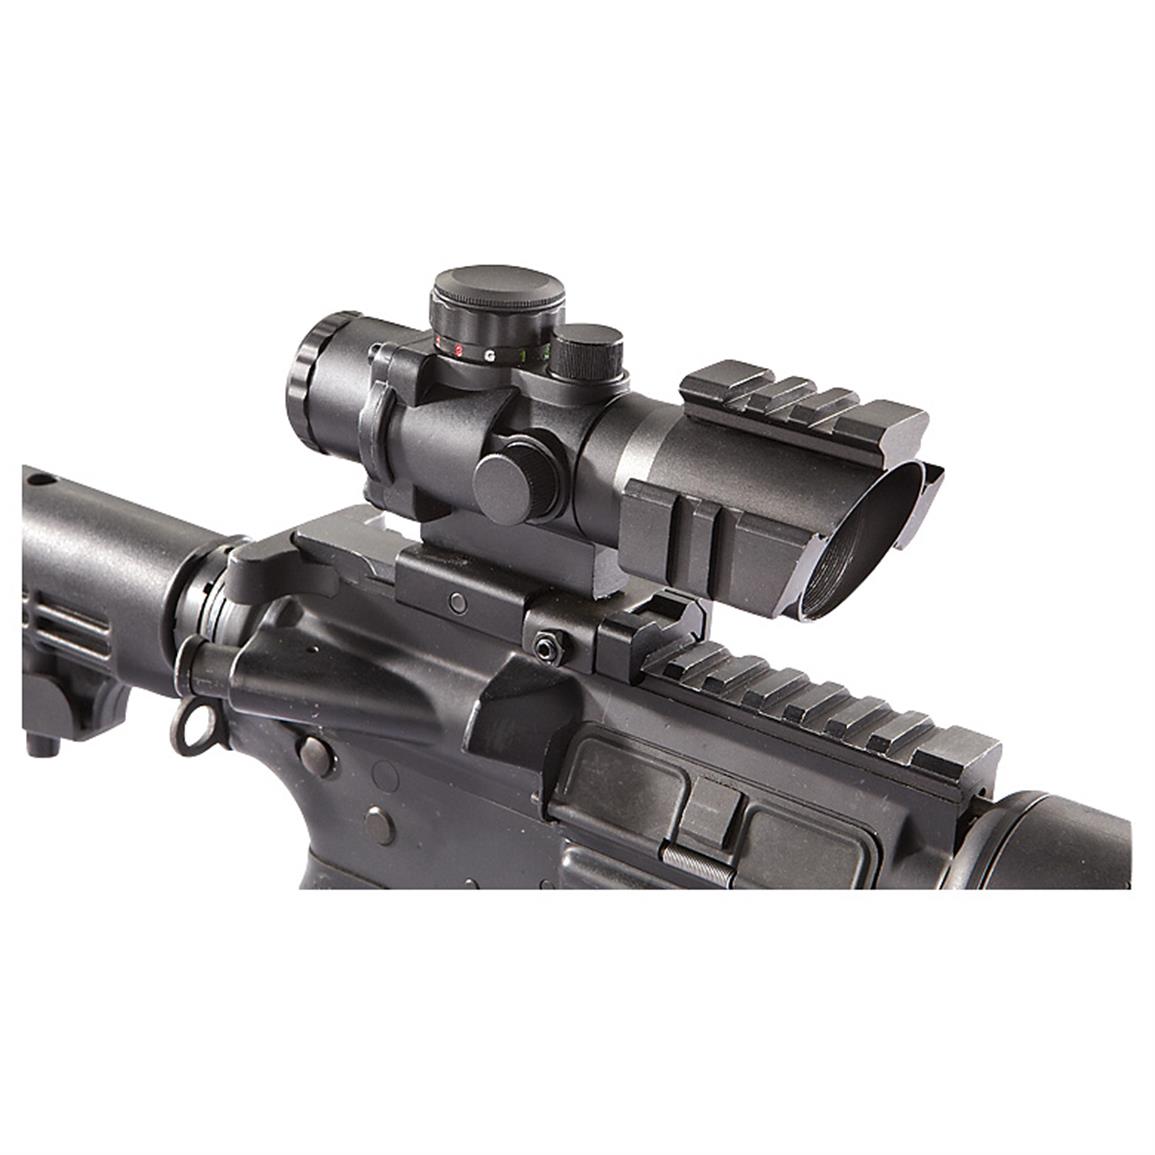 Sniper 4x32mm Prismatic Scope 639077 Rifle Scopes And Accessories At ...